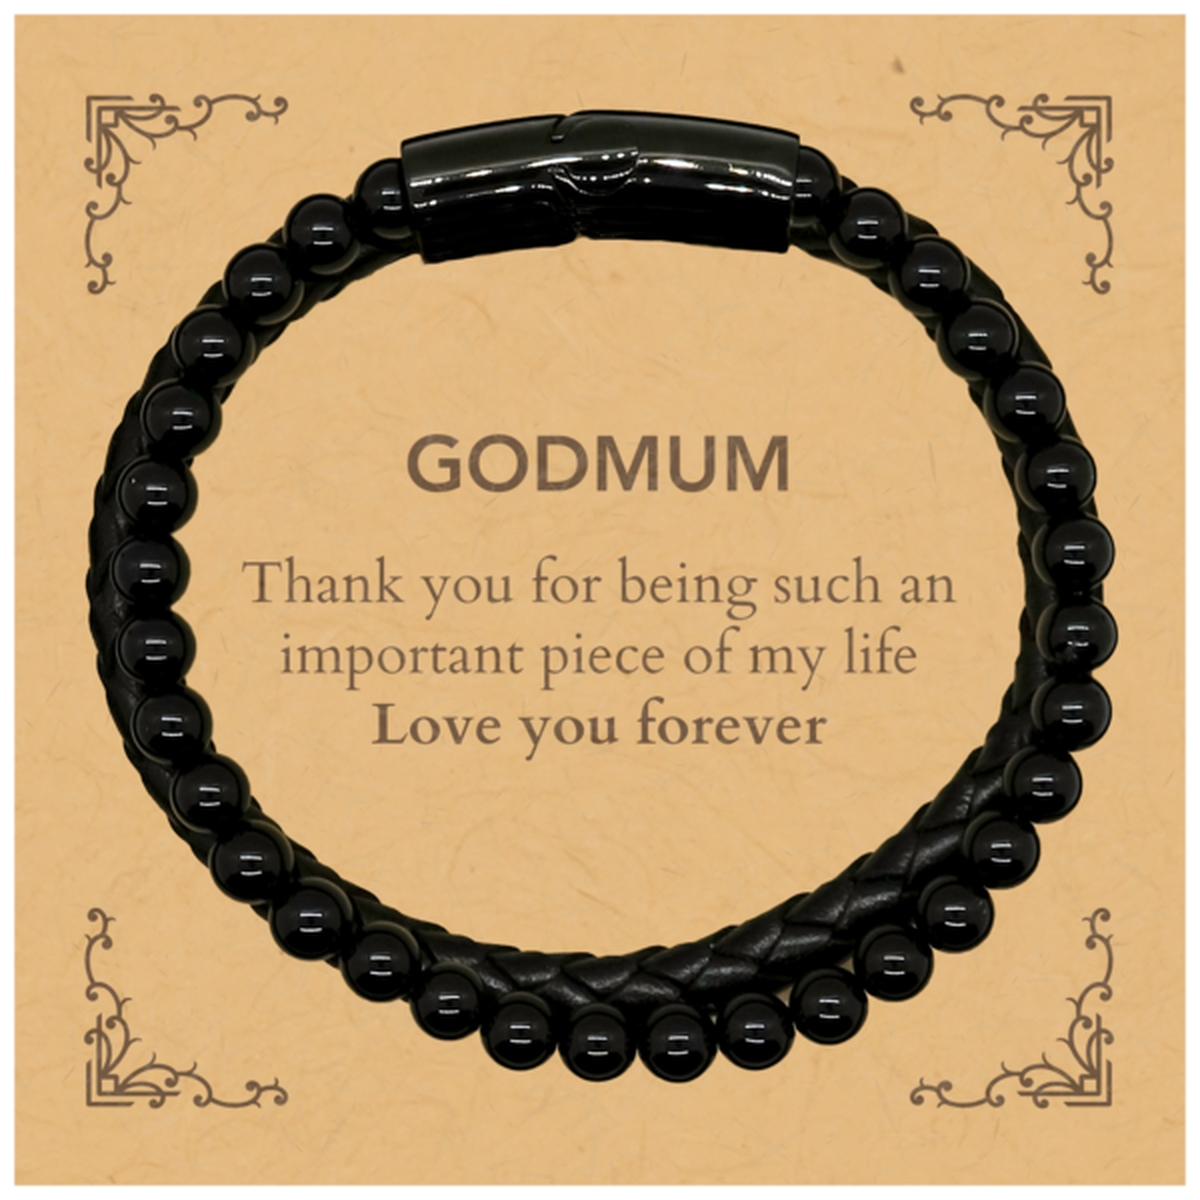 Appropriate Godmum Stone Leather Bracelets Epic Birthday Gifts for Godmum Thank you for being such an important piece of my life Godmum Christmas Mothers Fathers Day